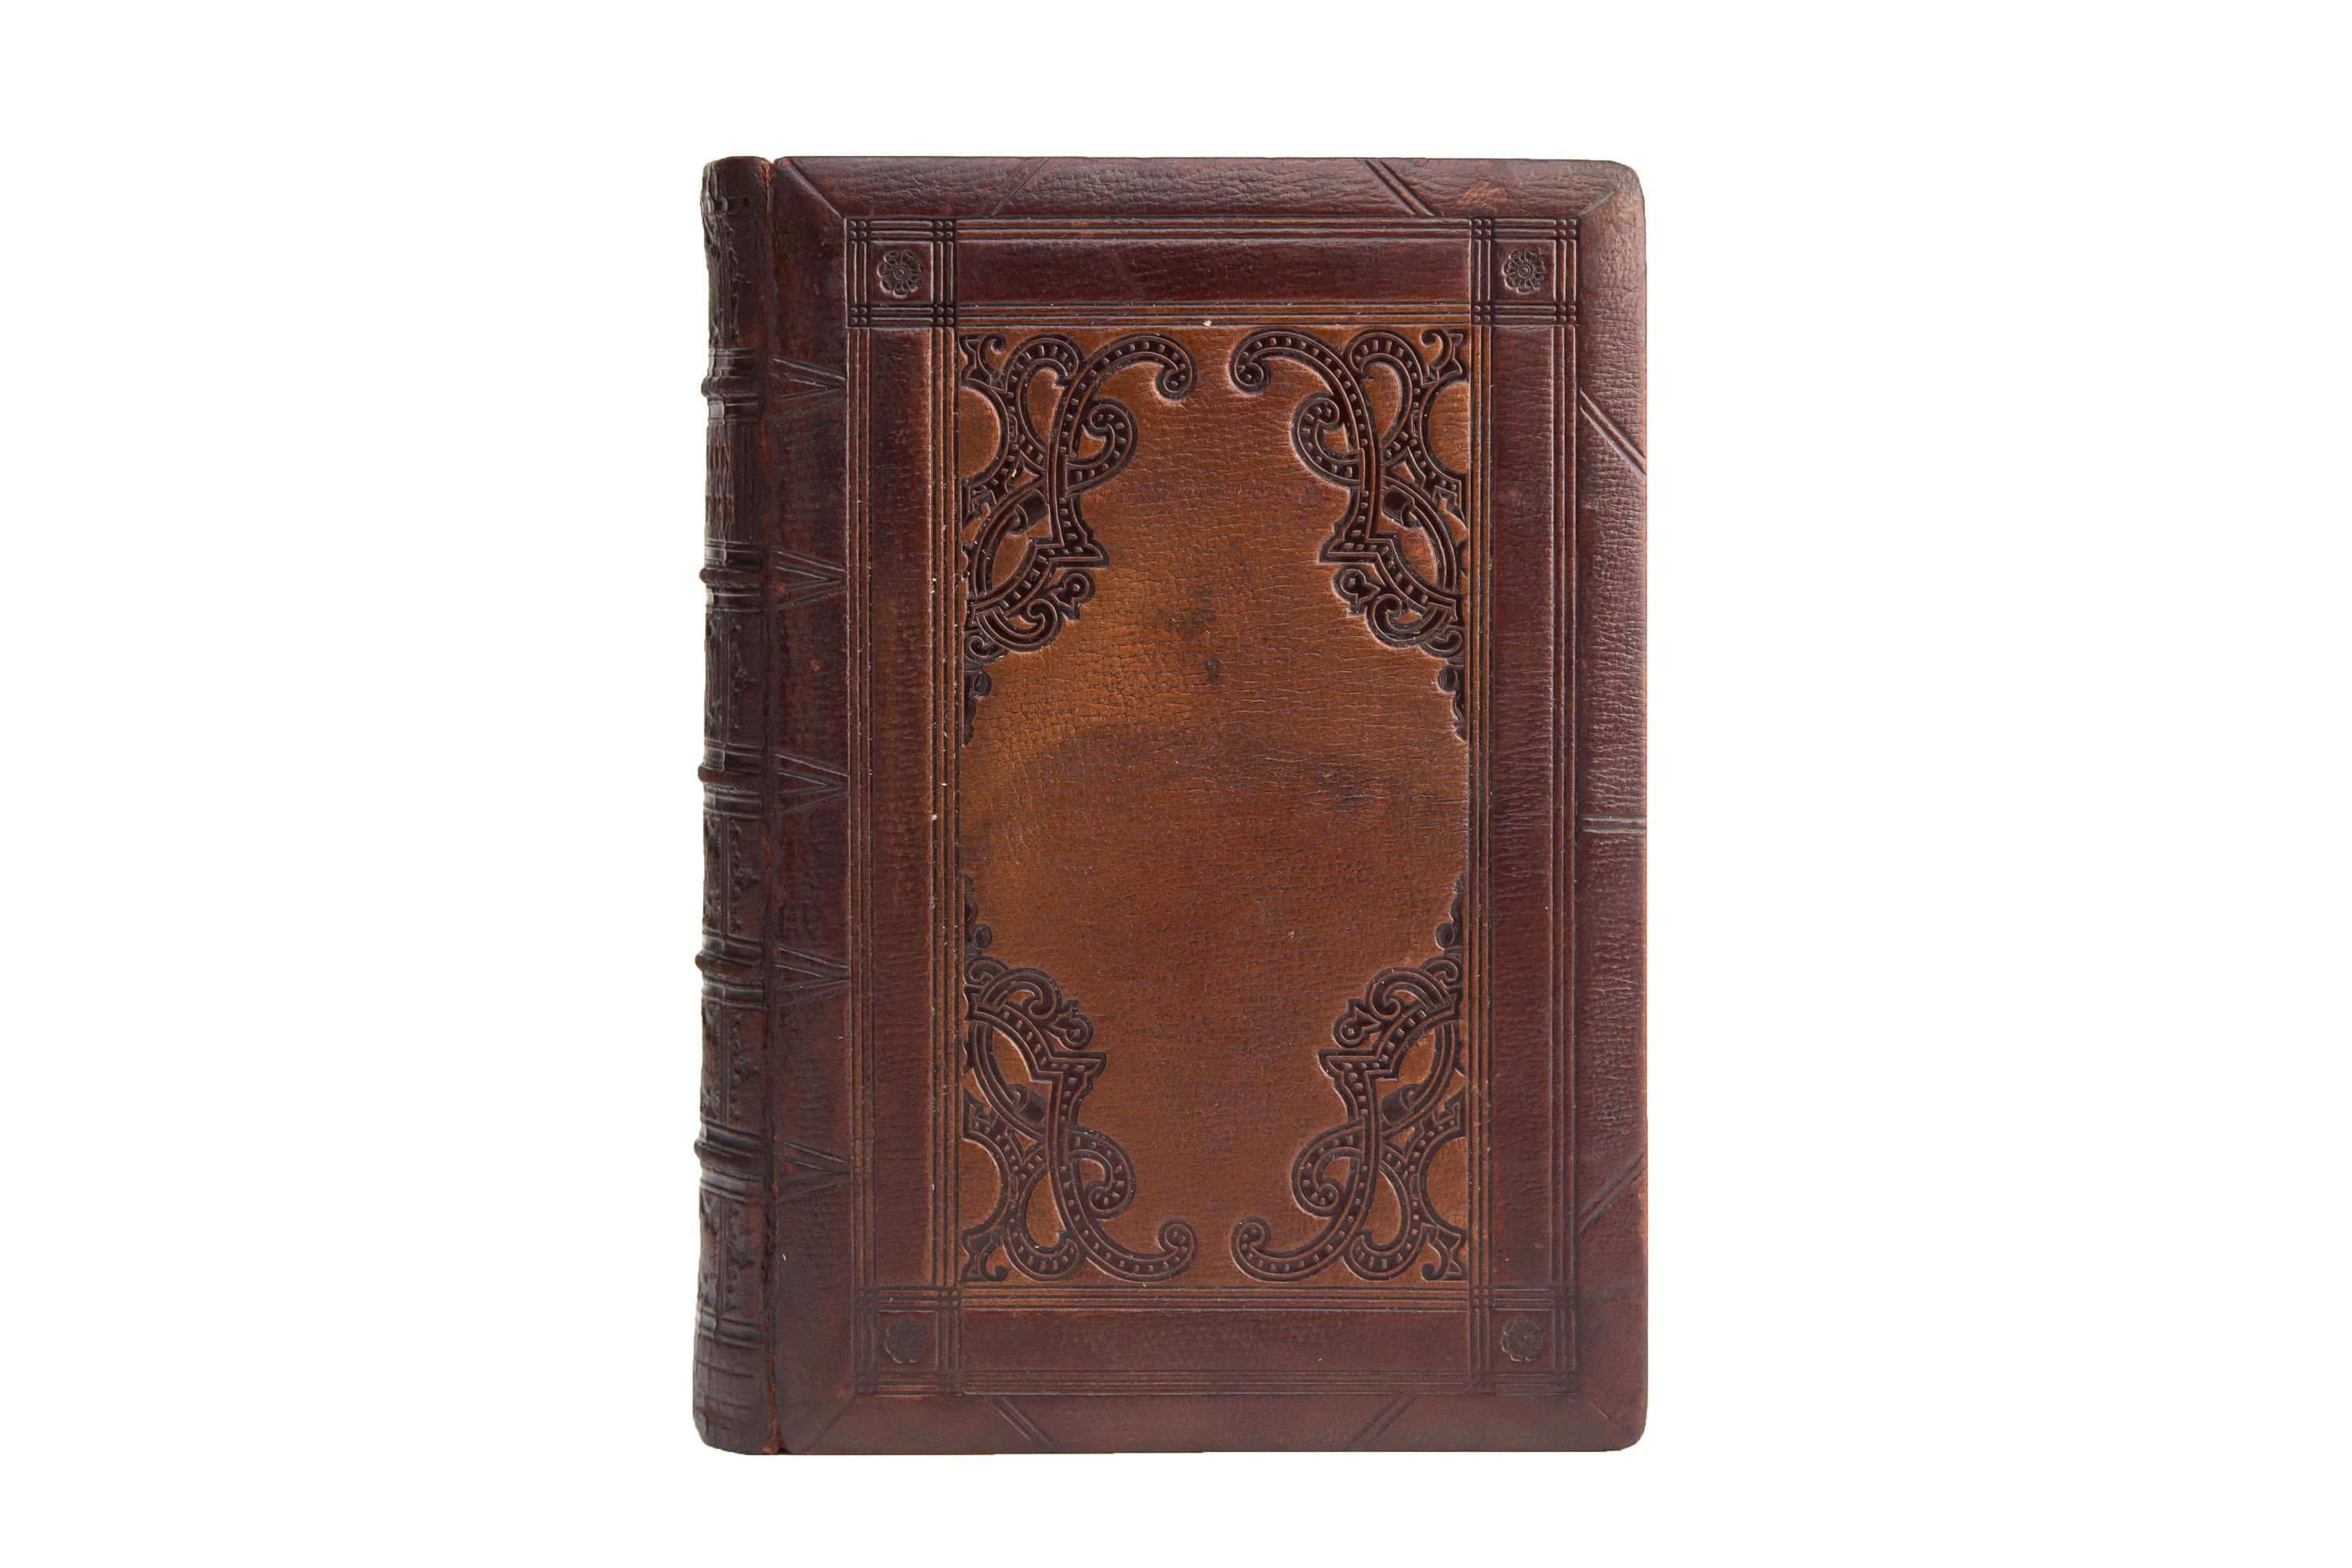 1 Volume. (Anon) The Book of Common Prayer. First Edition. Bound in full brown morocco with covers displaying ornate and geometric black tooling. Raised band spined with ornate black-tooled panels and label lettering in gilt. All of the edges are